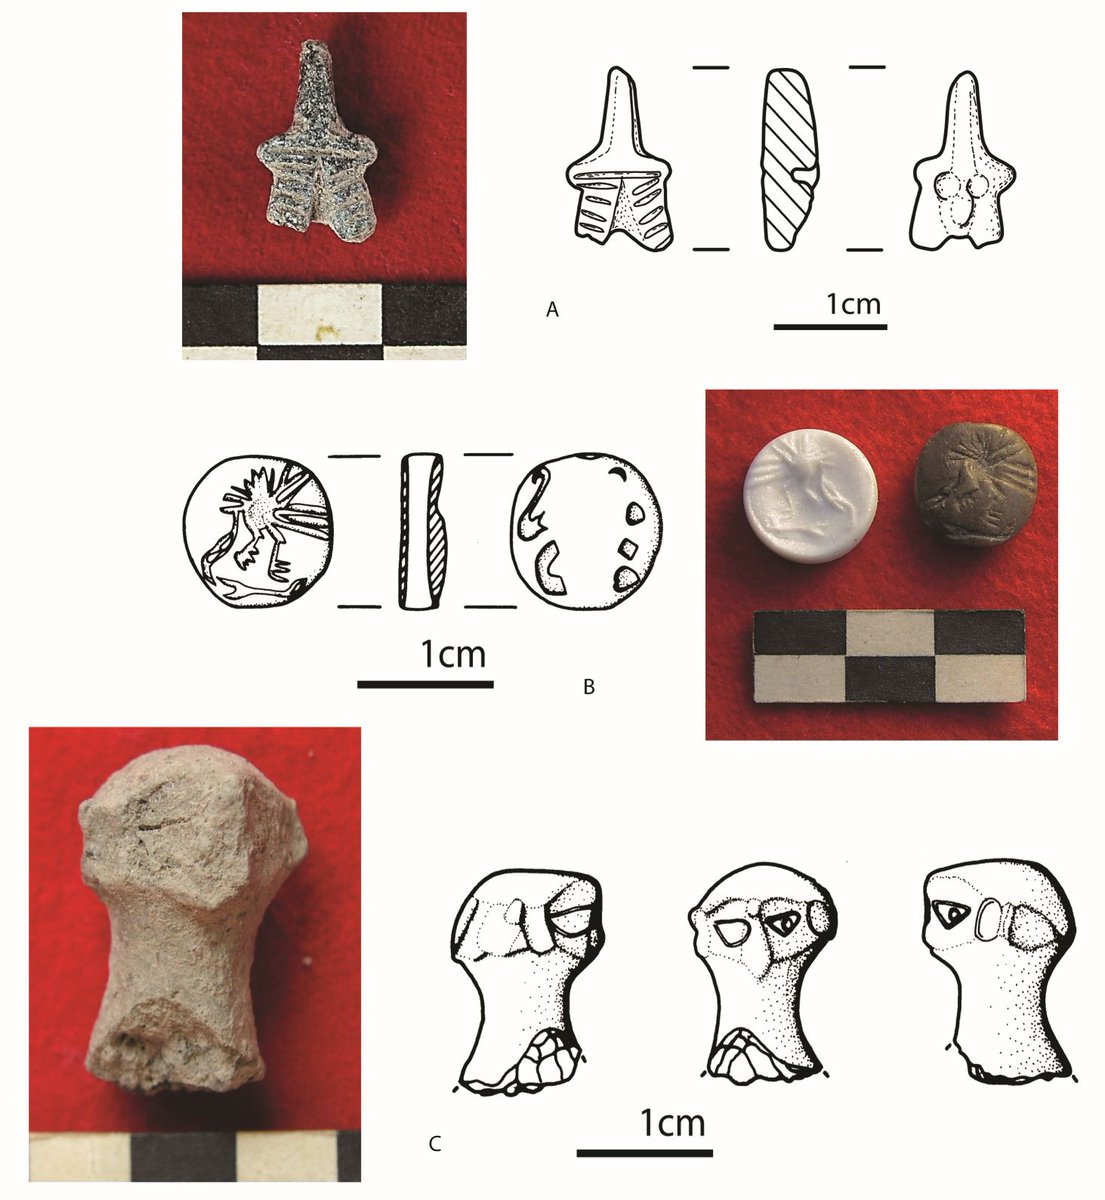 buff.ly/4ajJsuU New Article: R.Özbal reconsiders the meaning of objects with artistic representations in the Halaf Period, northern Mesopotamia (6th Millenn. BC) at Tell Kurdu, exploring how artifacts were contextualized to identify complexities of new cultural elements.